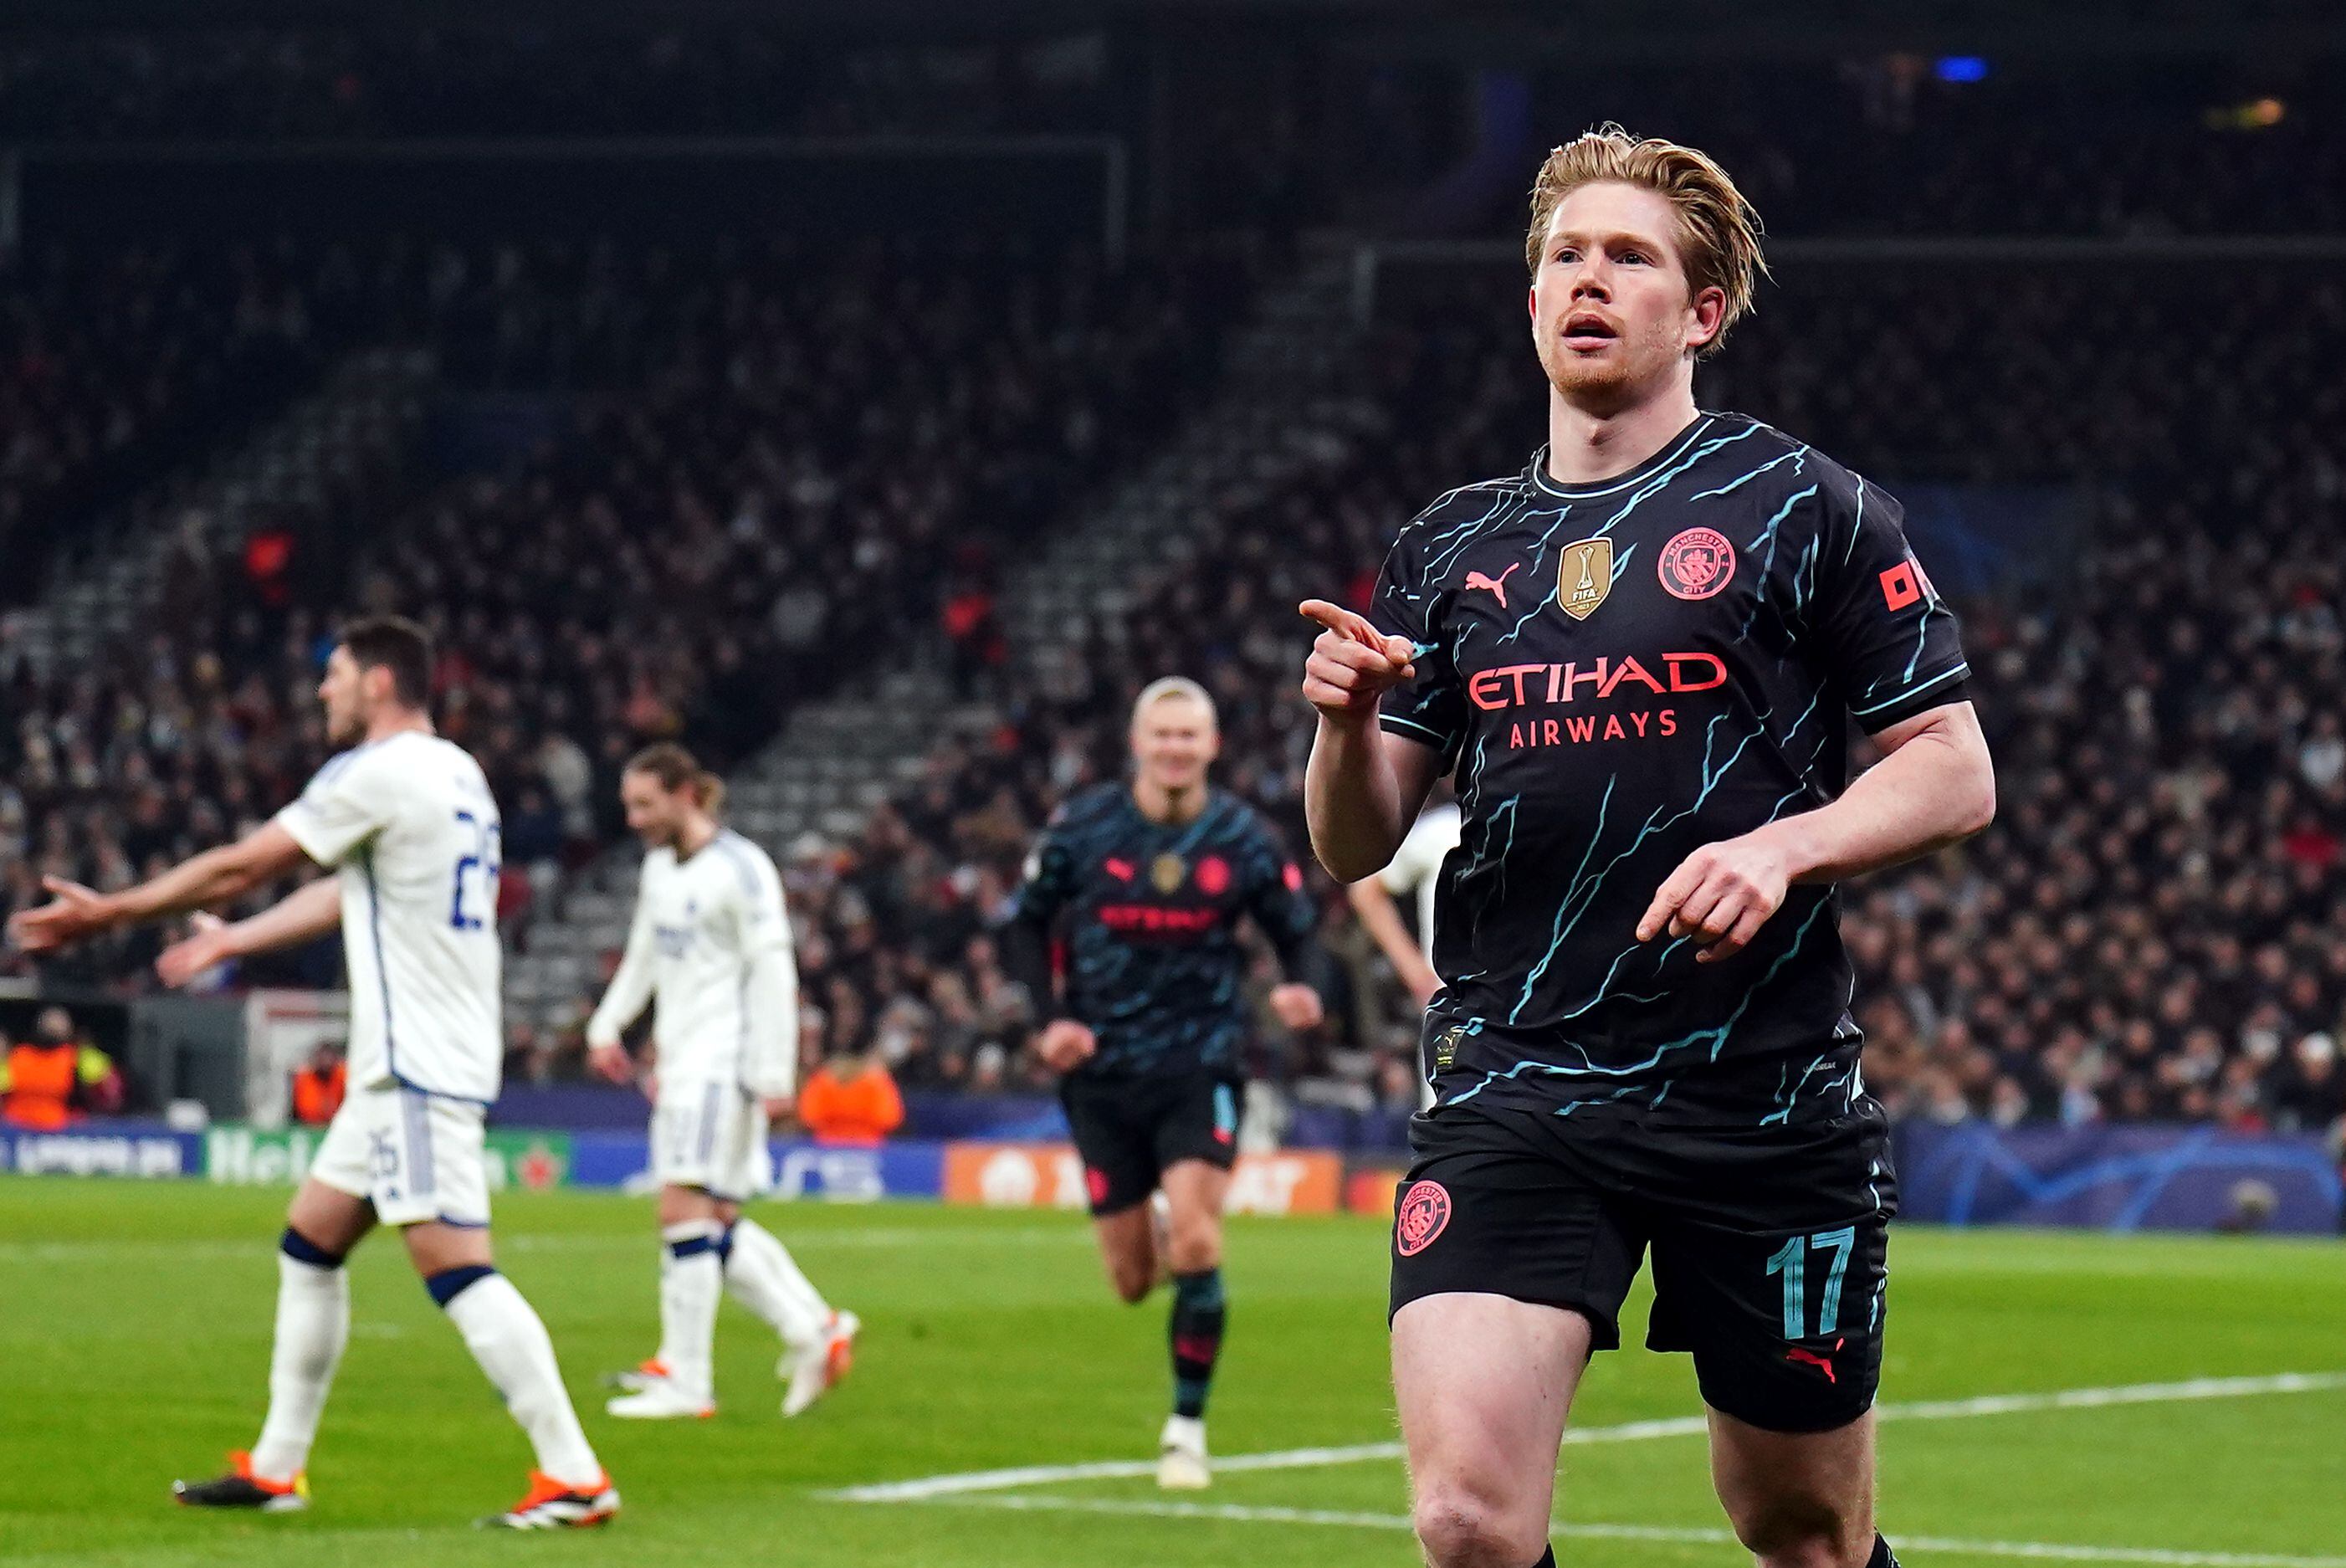 amazon, 'extraordinary' de bruyne leads man city to comfortable champions league victory